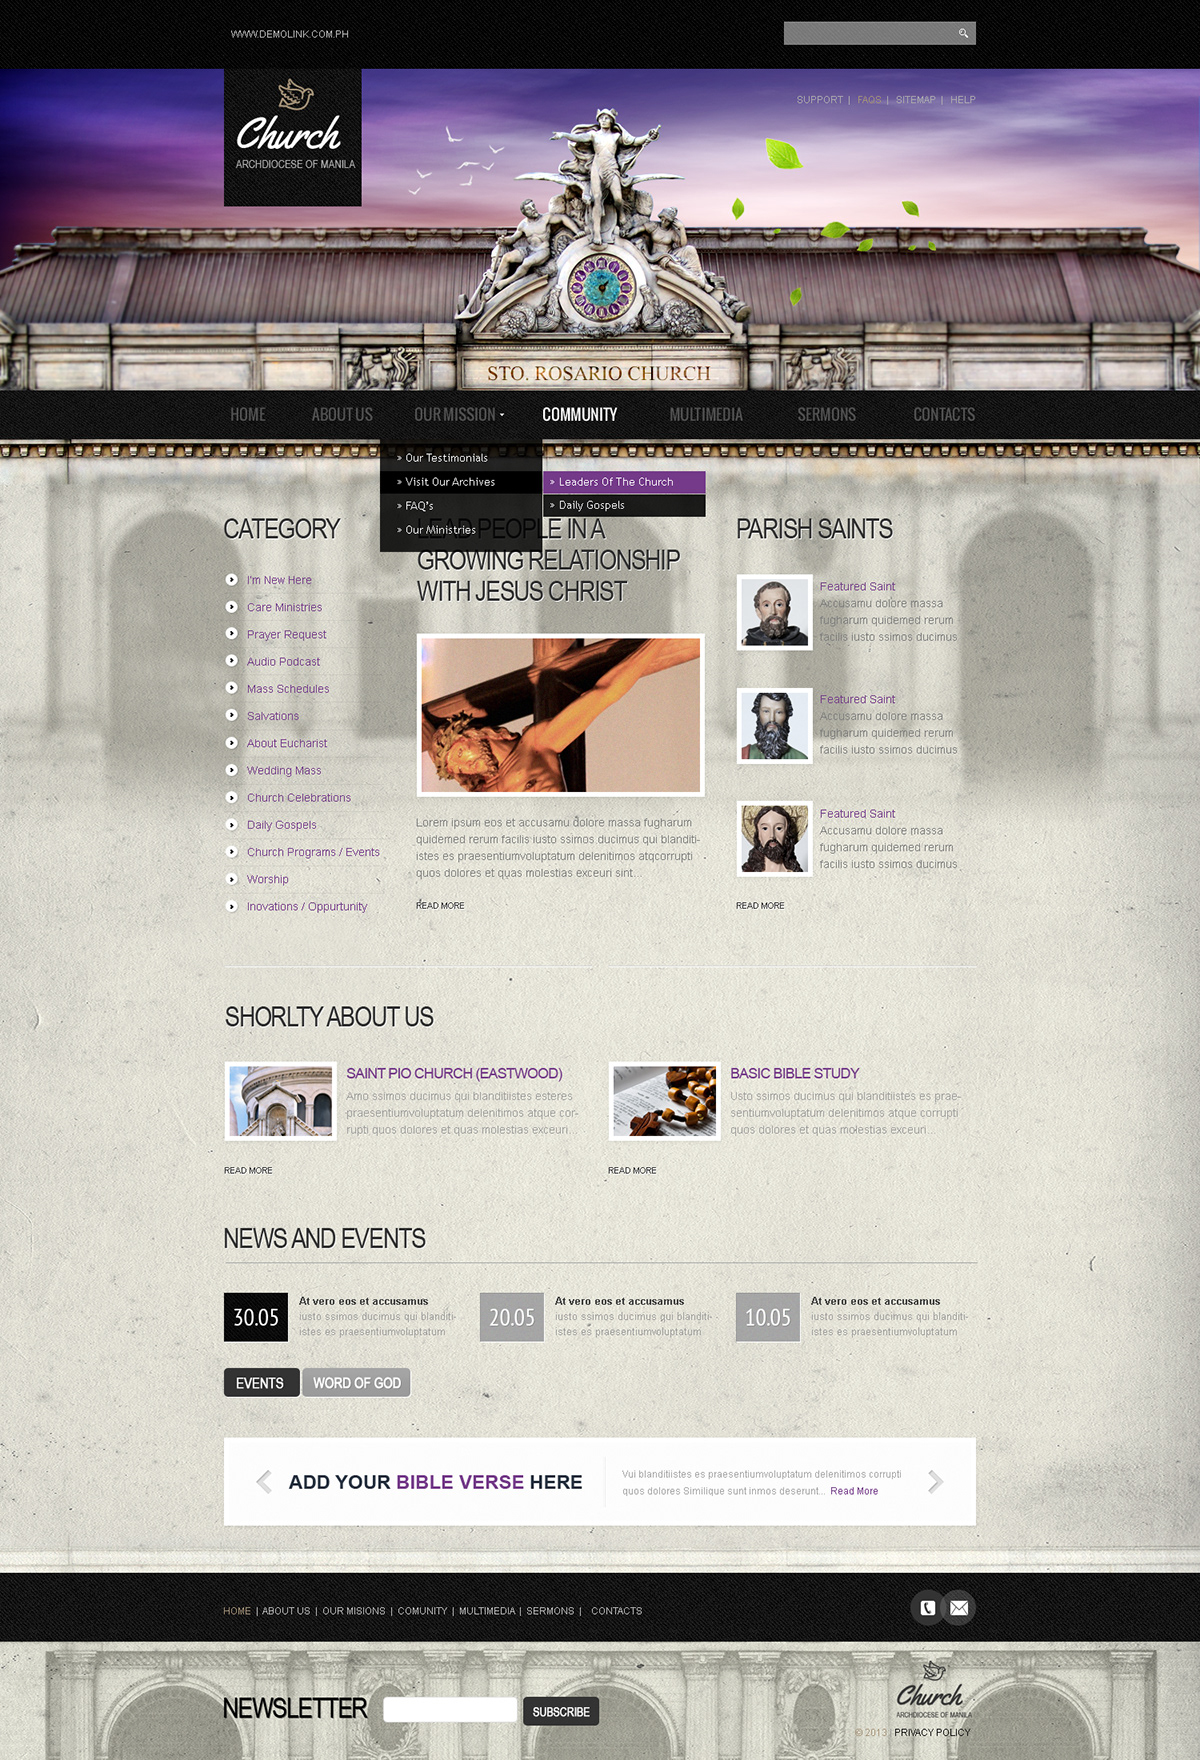 http://dribbble.com/shots/1201240-Church-Site-Preview?list=users